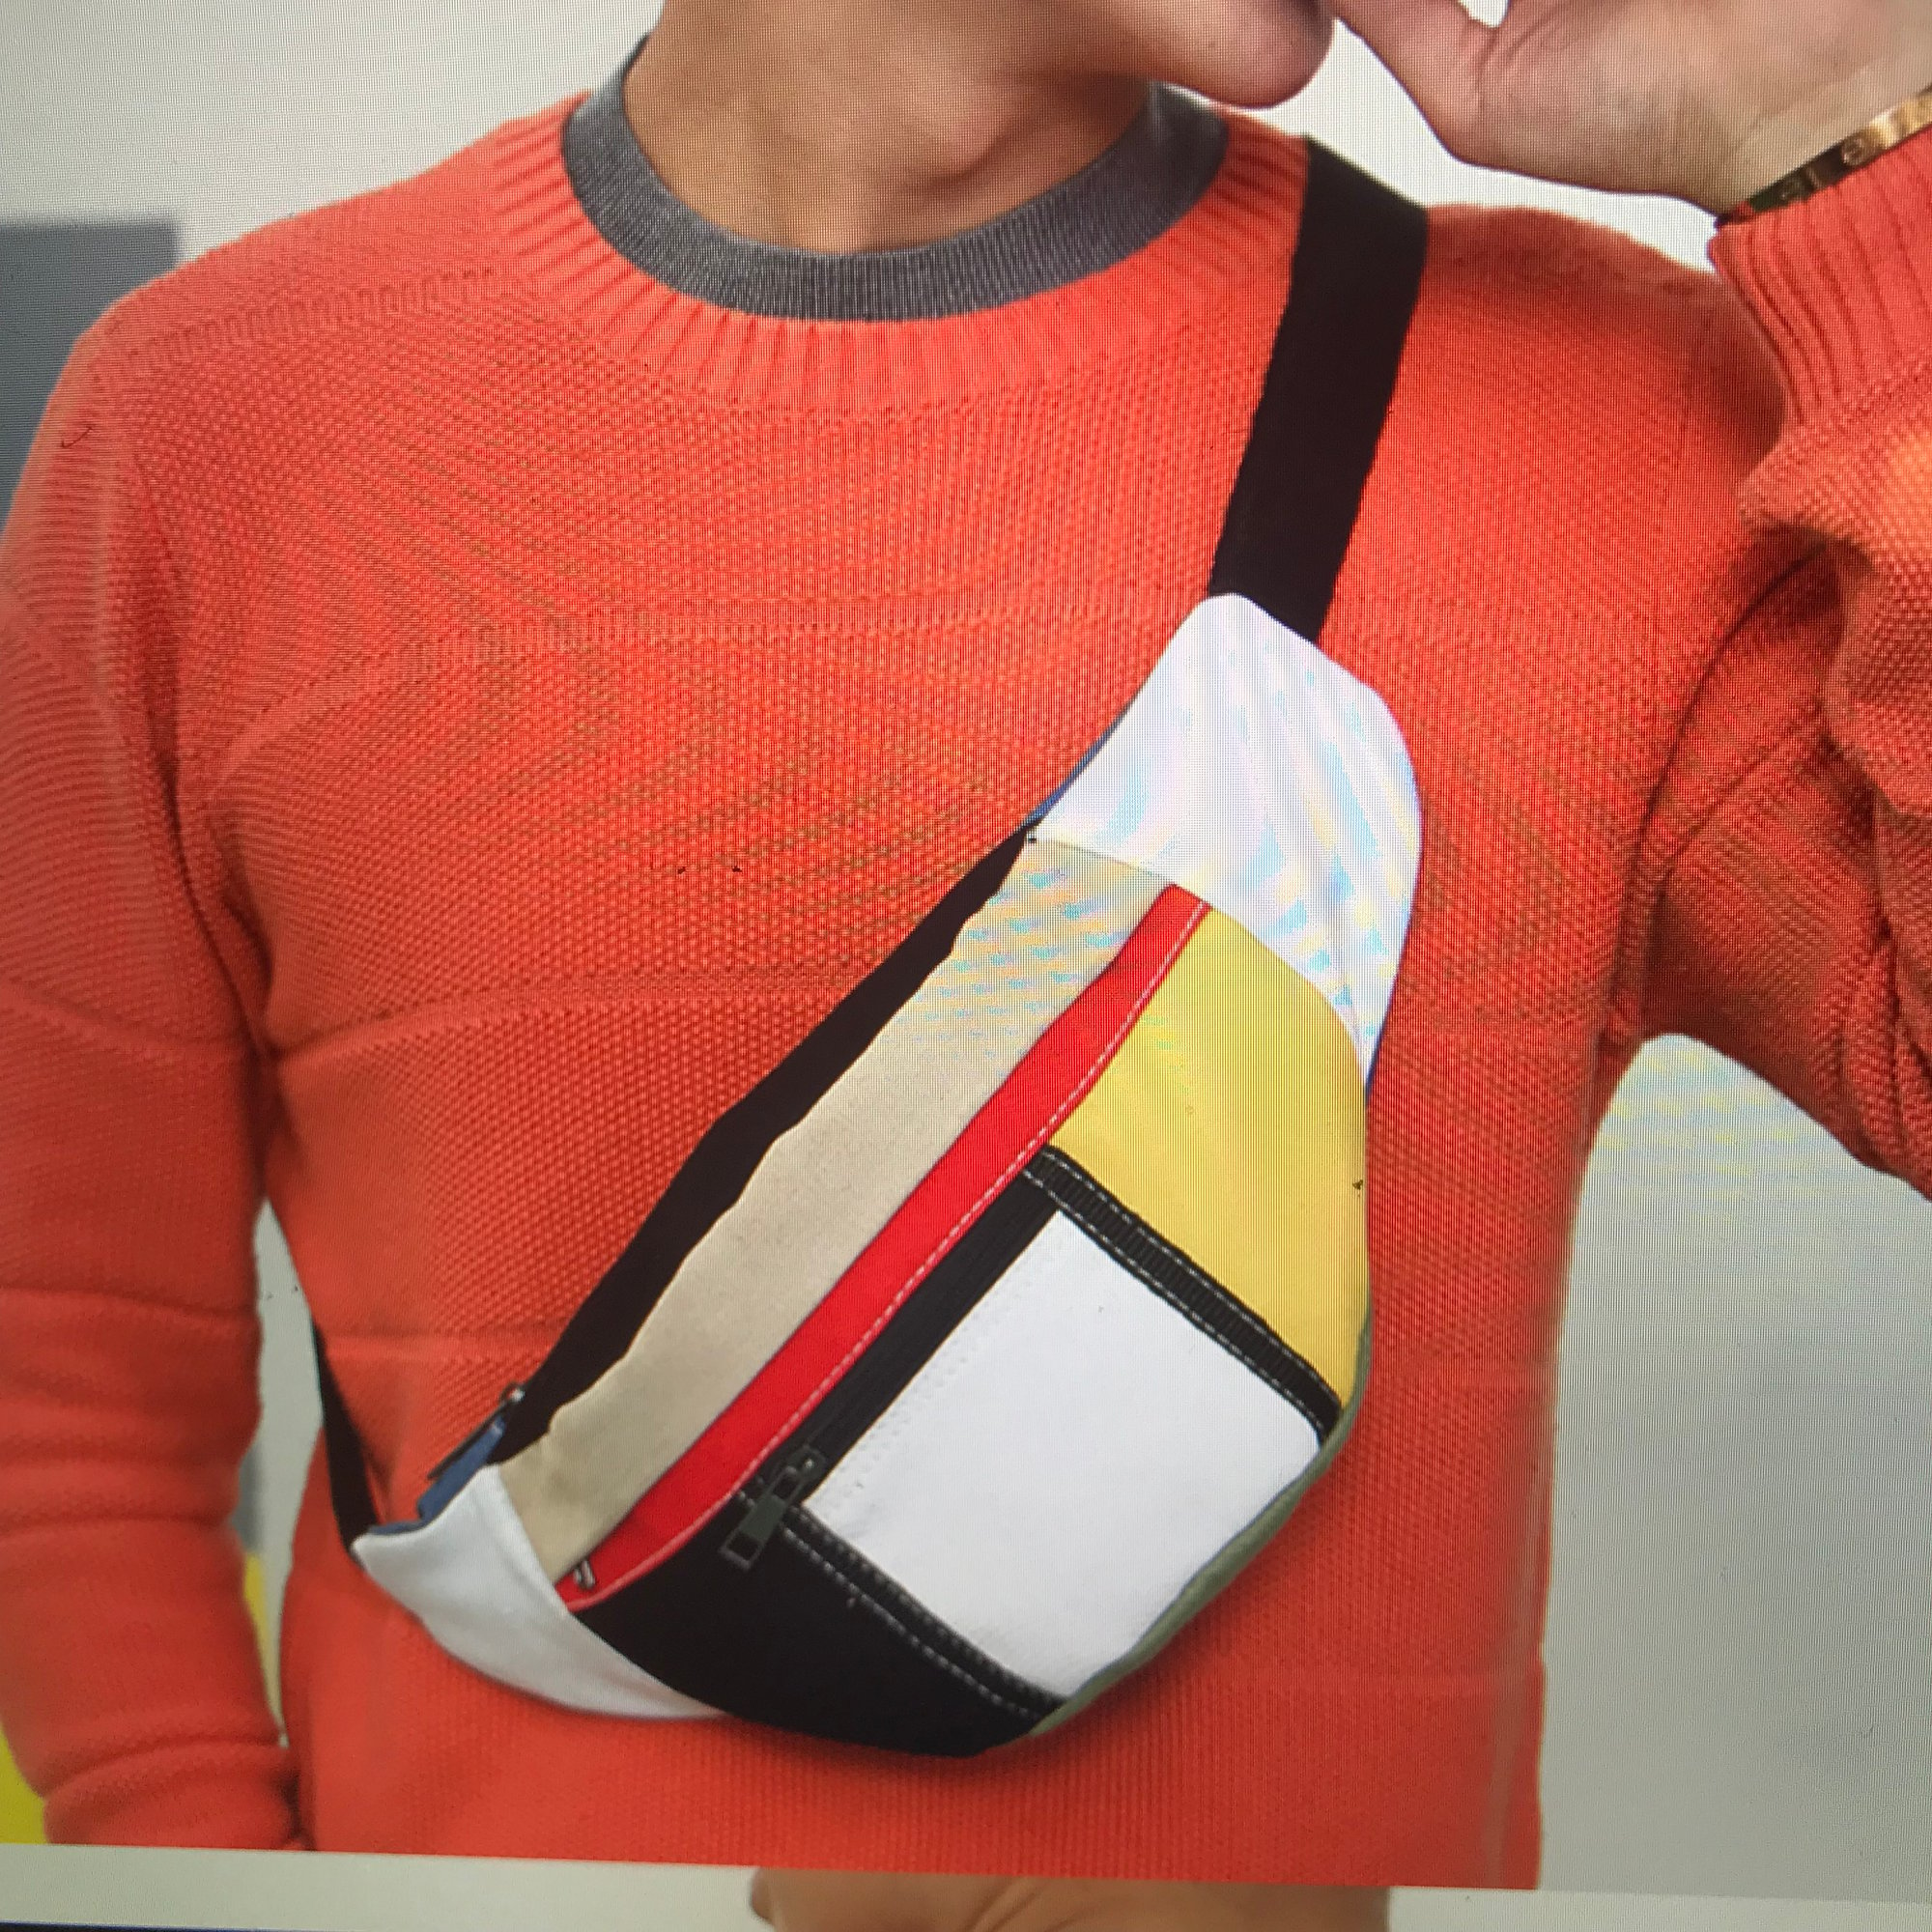 Fanny Pack in Colorblock